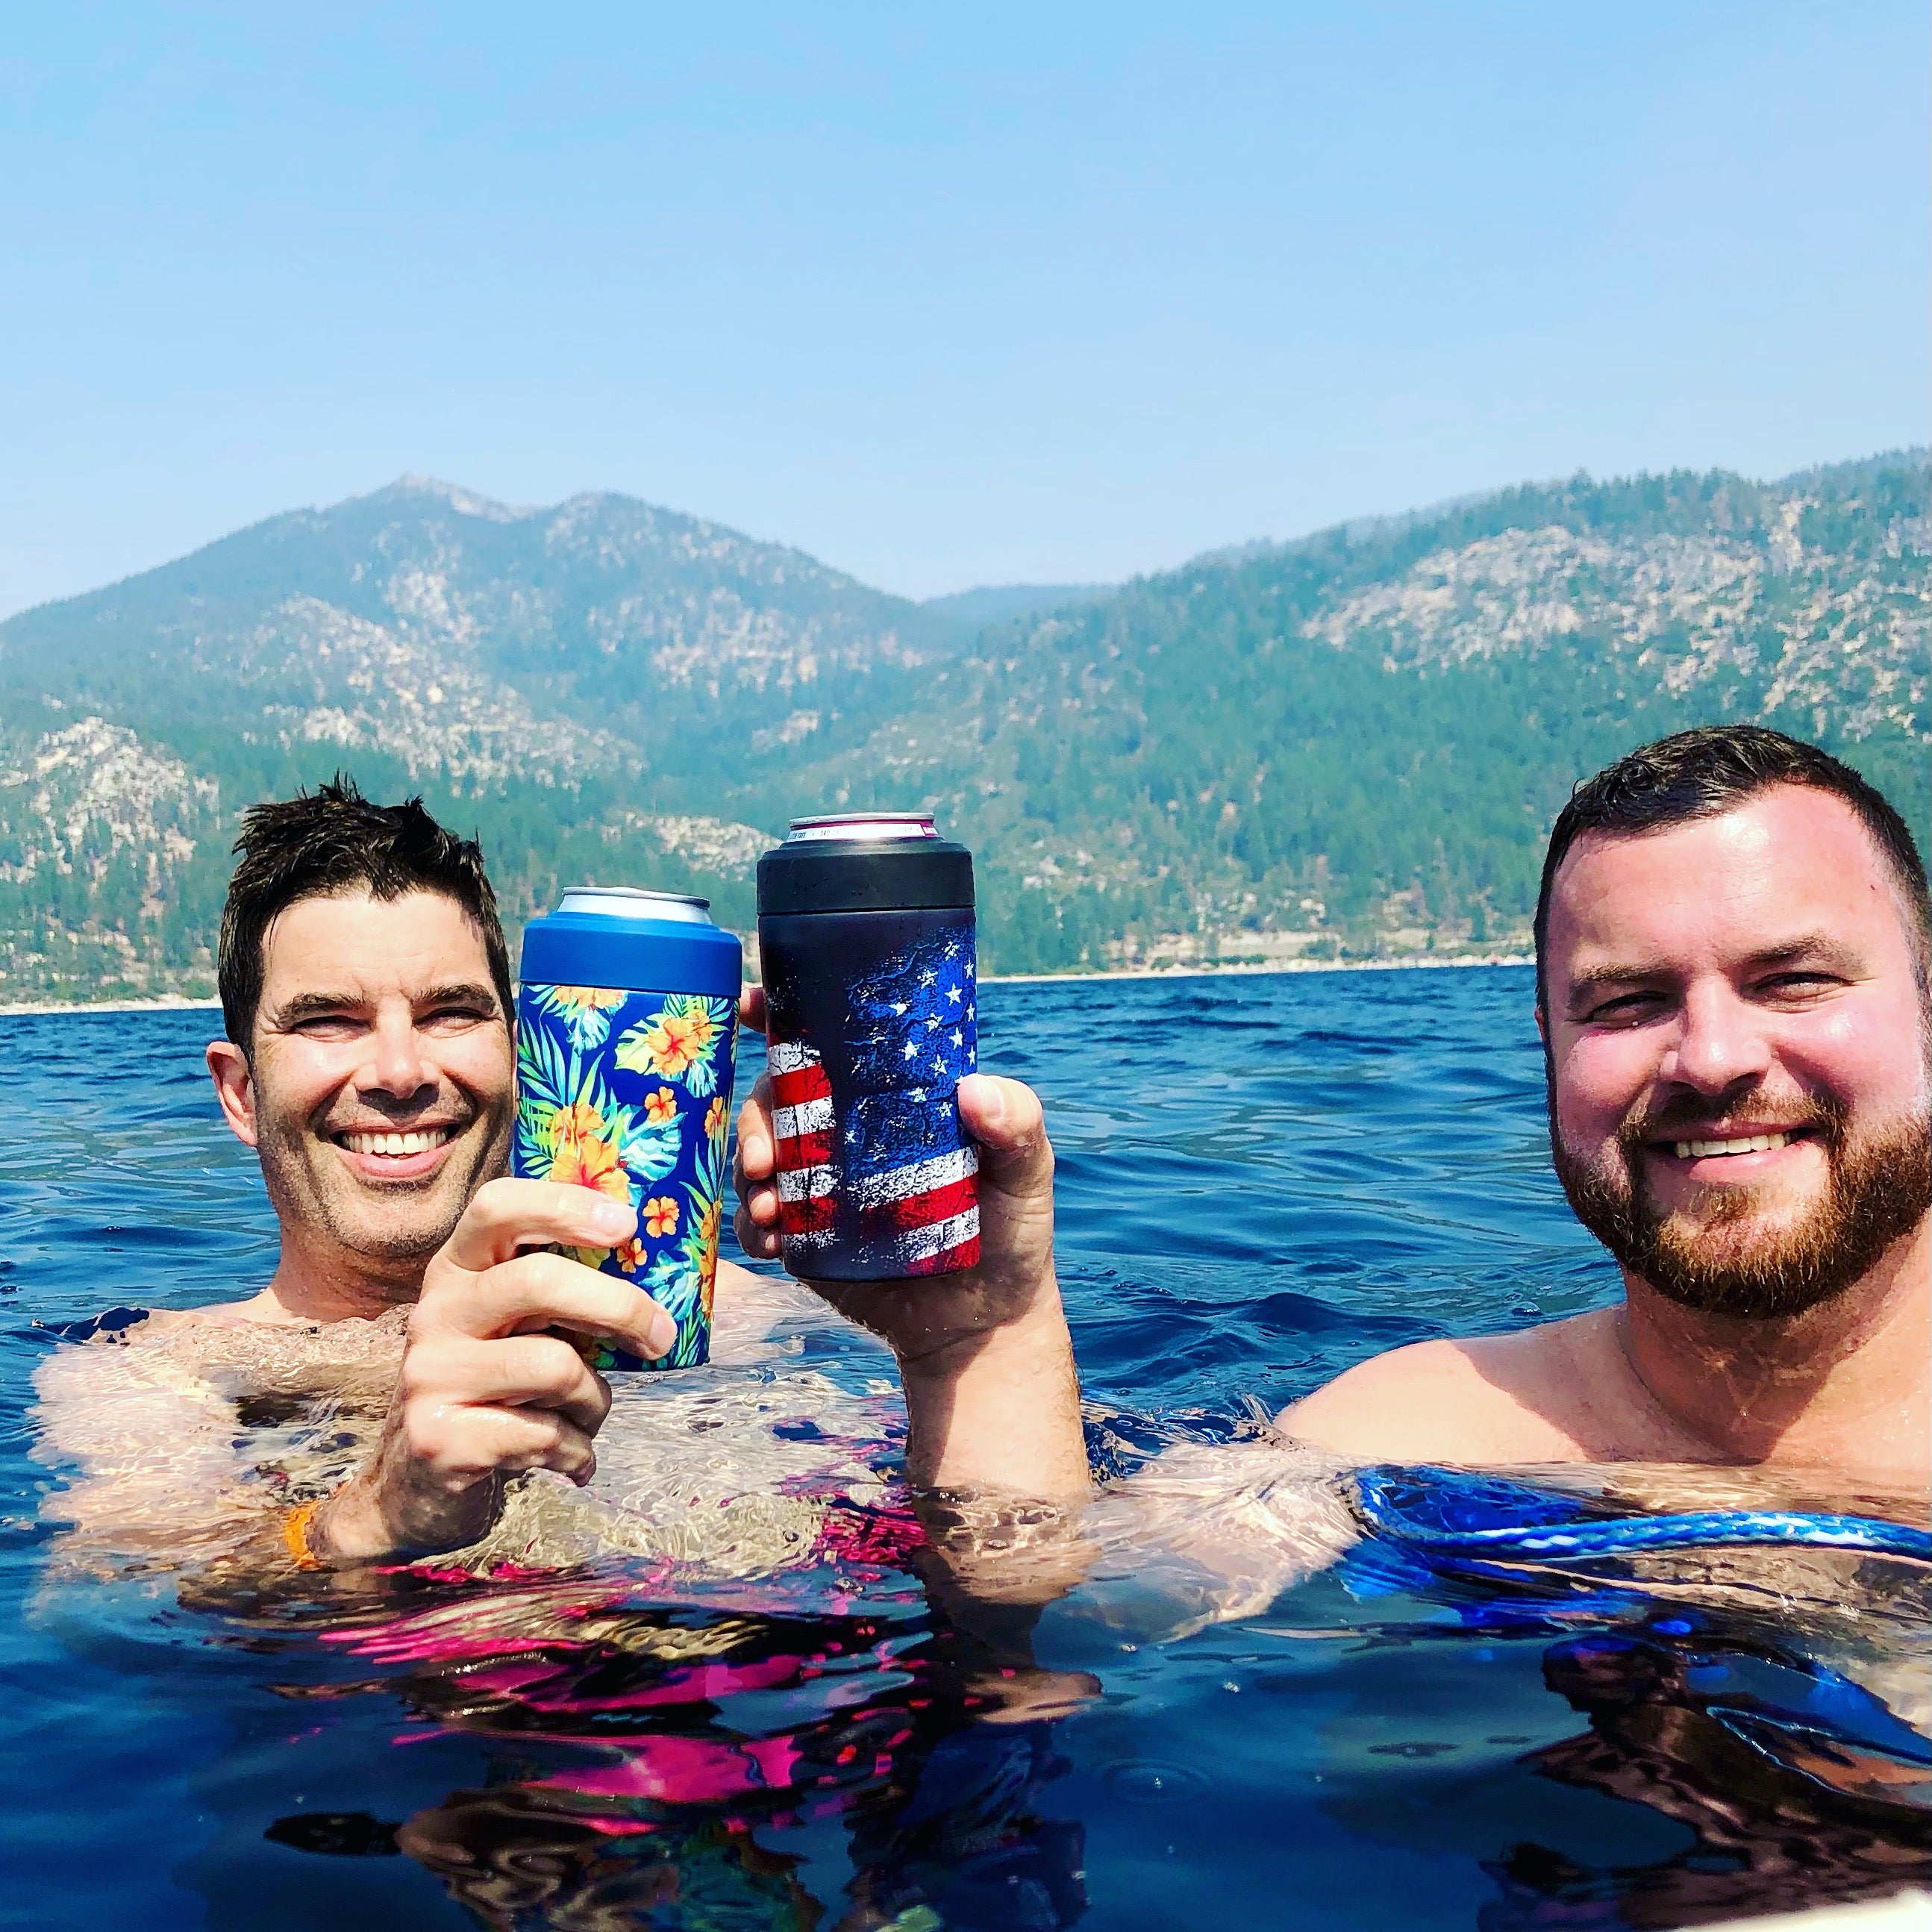 Frost Buddy​ Universal 2.0 Insulated Beach Buddy Can Cooler